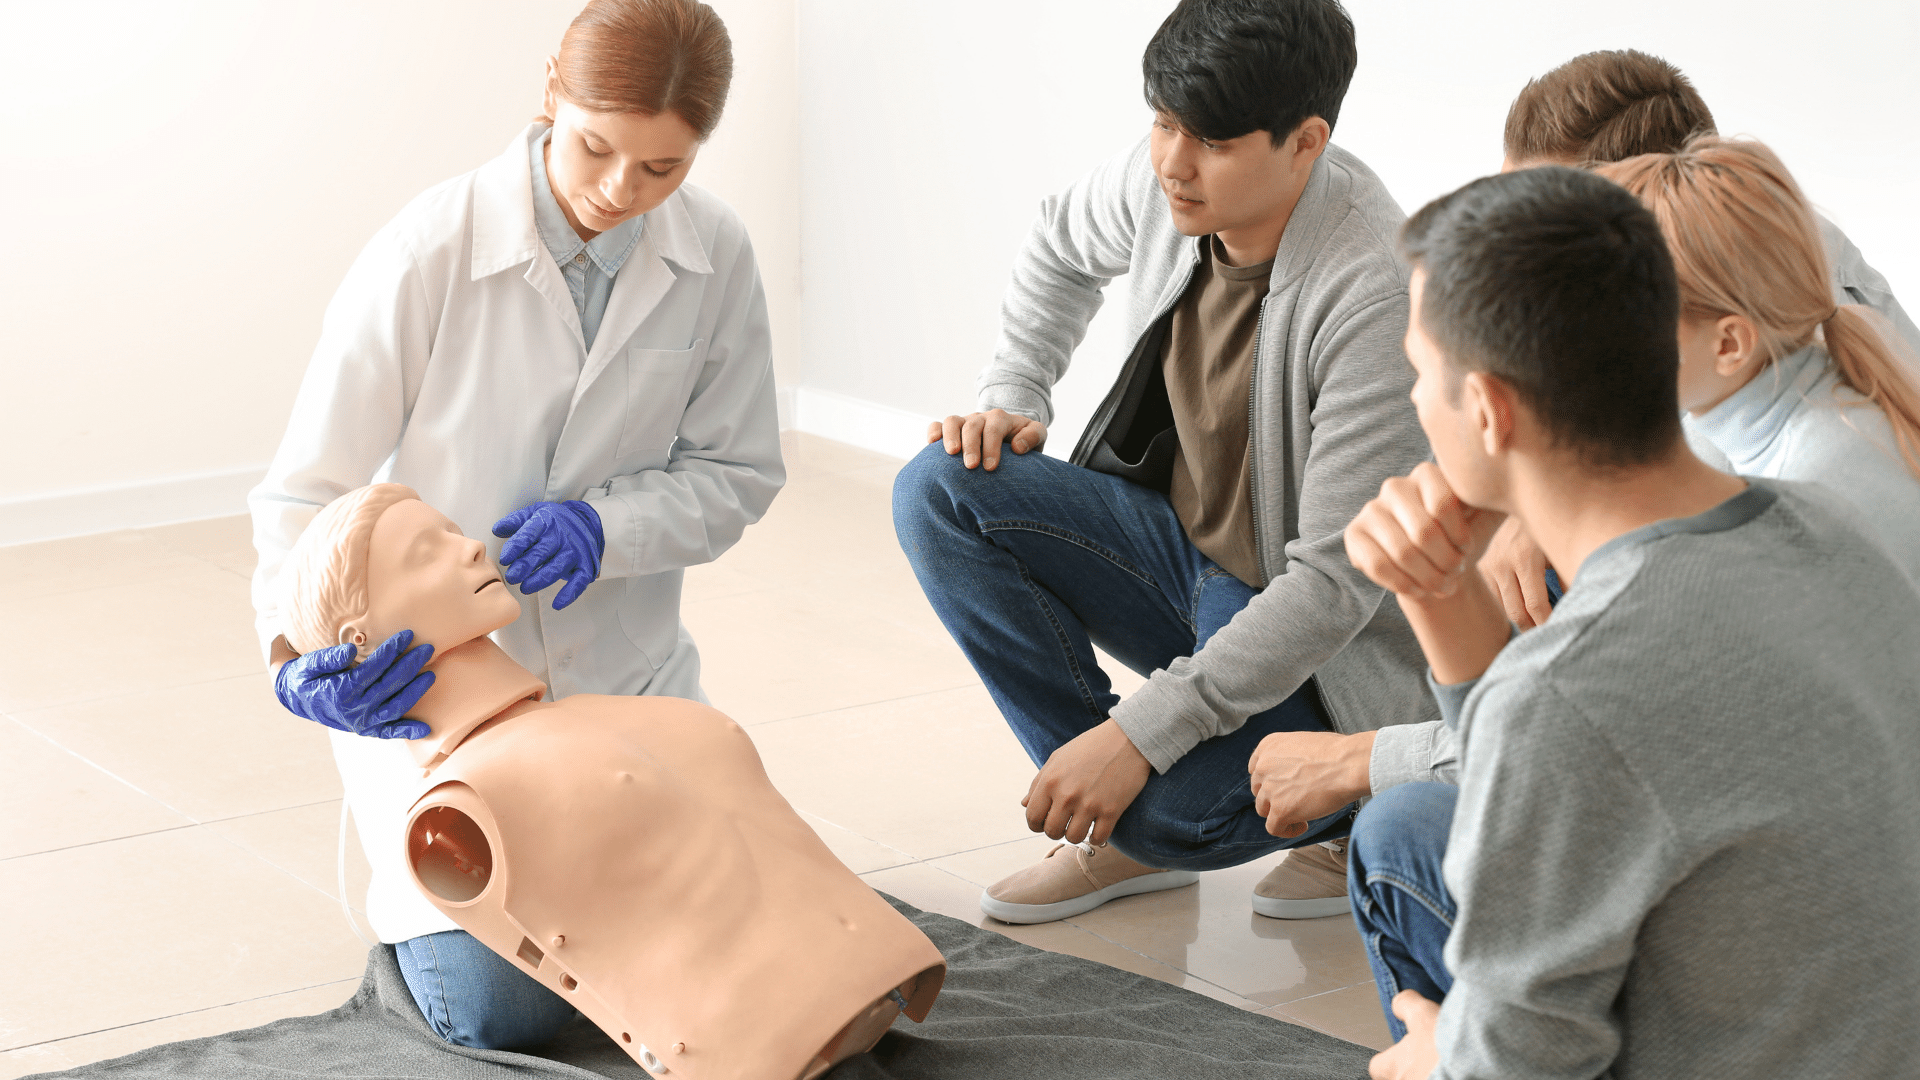 First Aid Training class